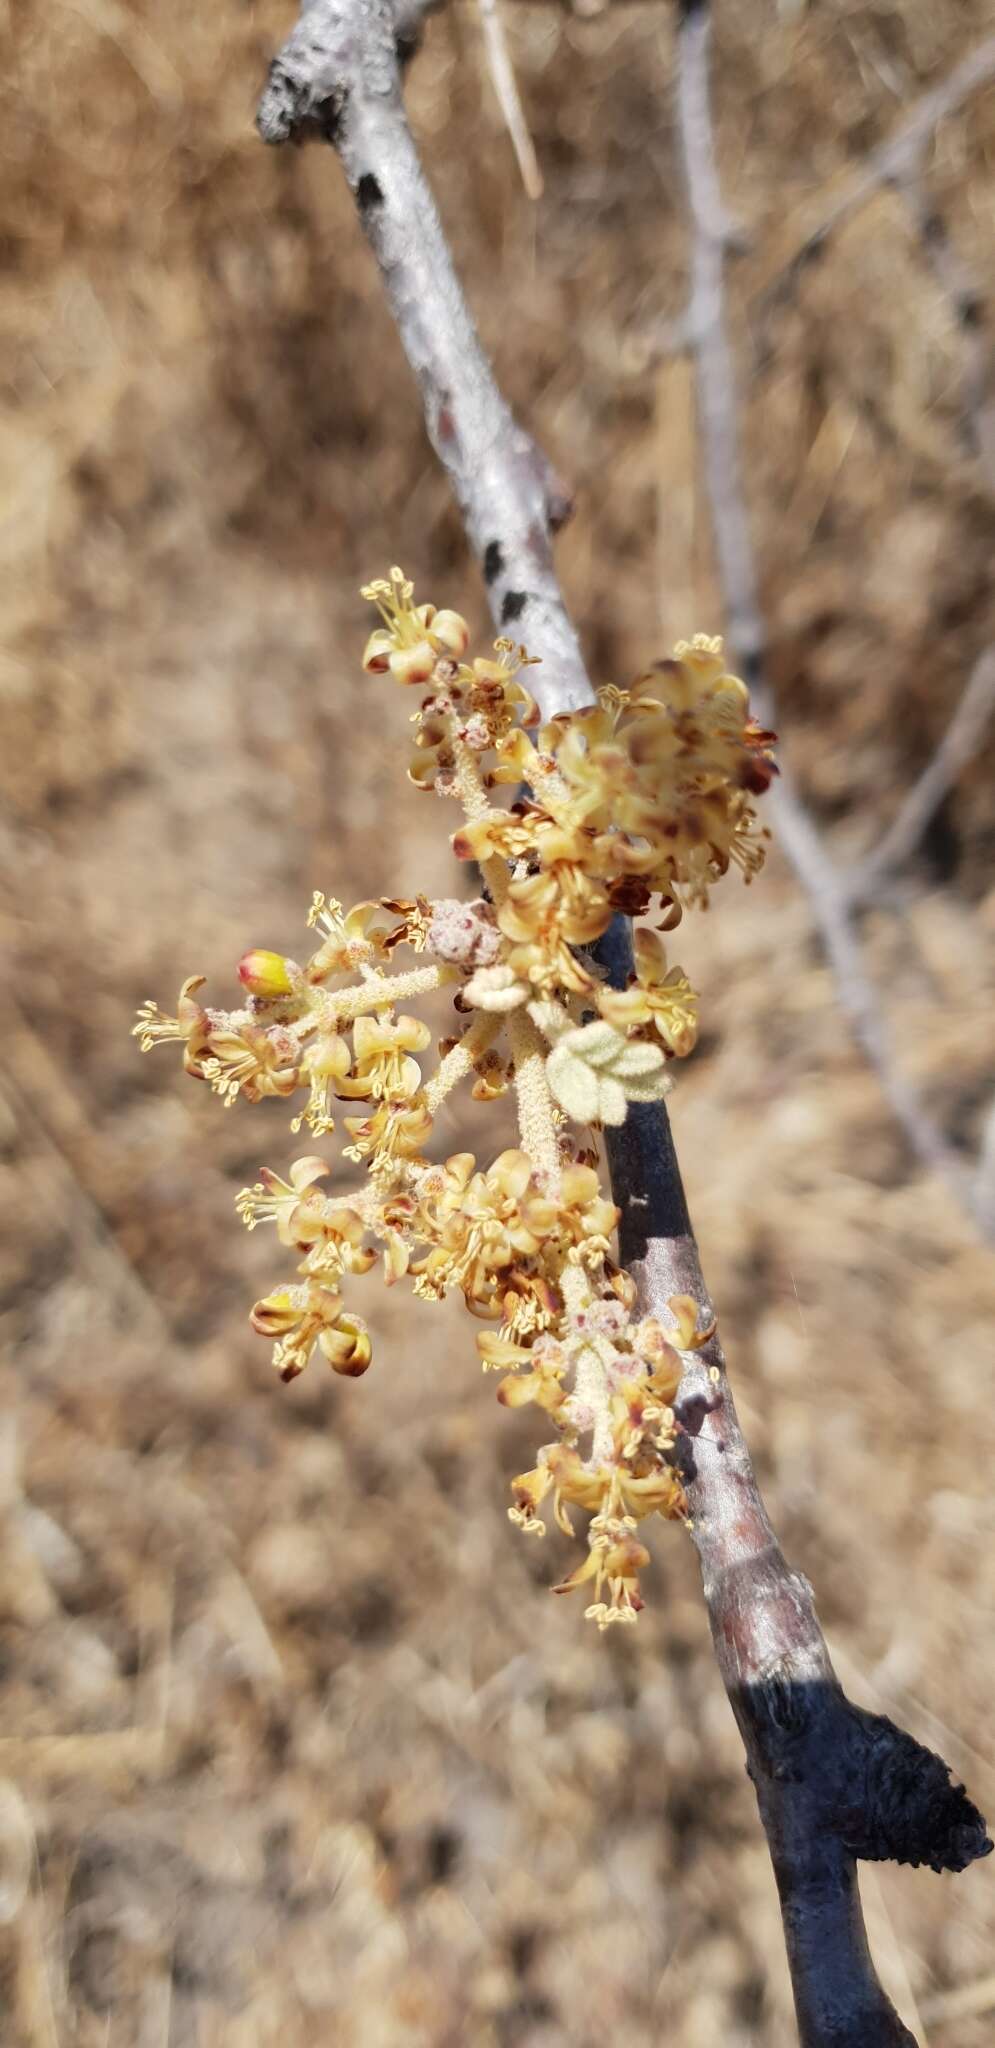 Image of Pepper-leaved commiphora